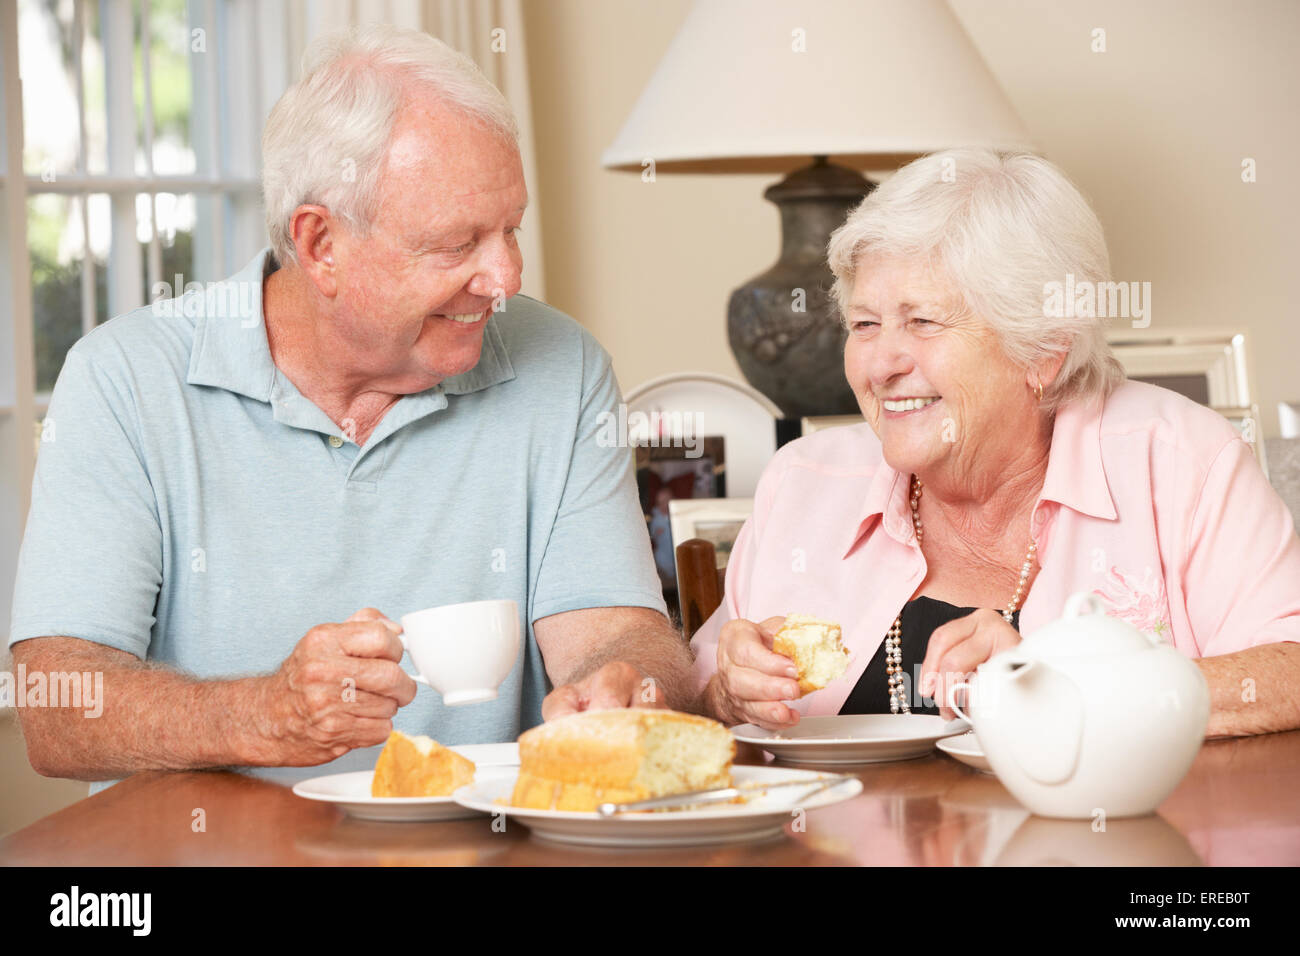 Retired Senior Couple Enjoying Afternoon Tea Together At Home Stock Photo